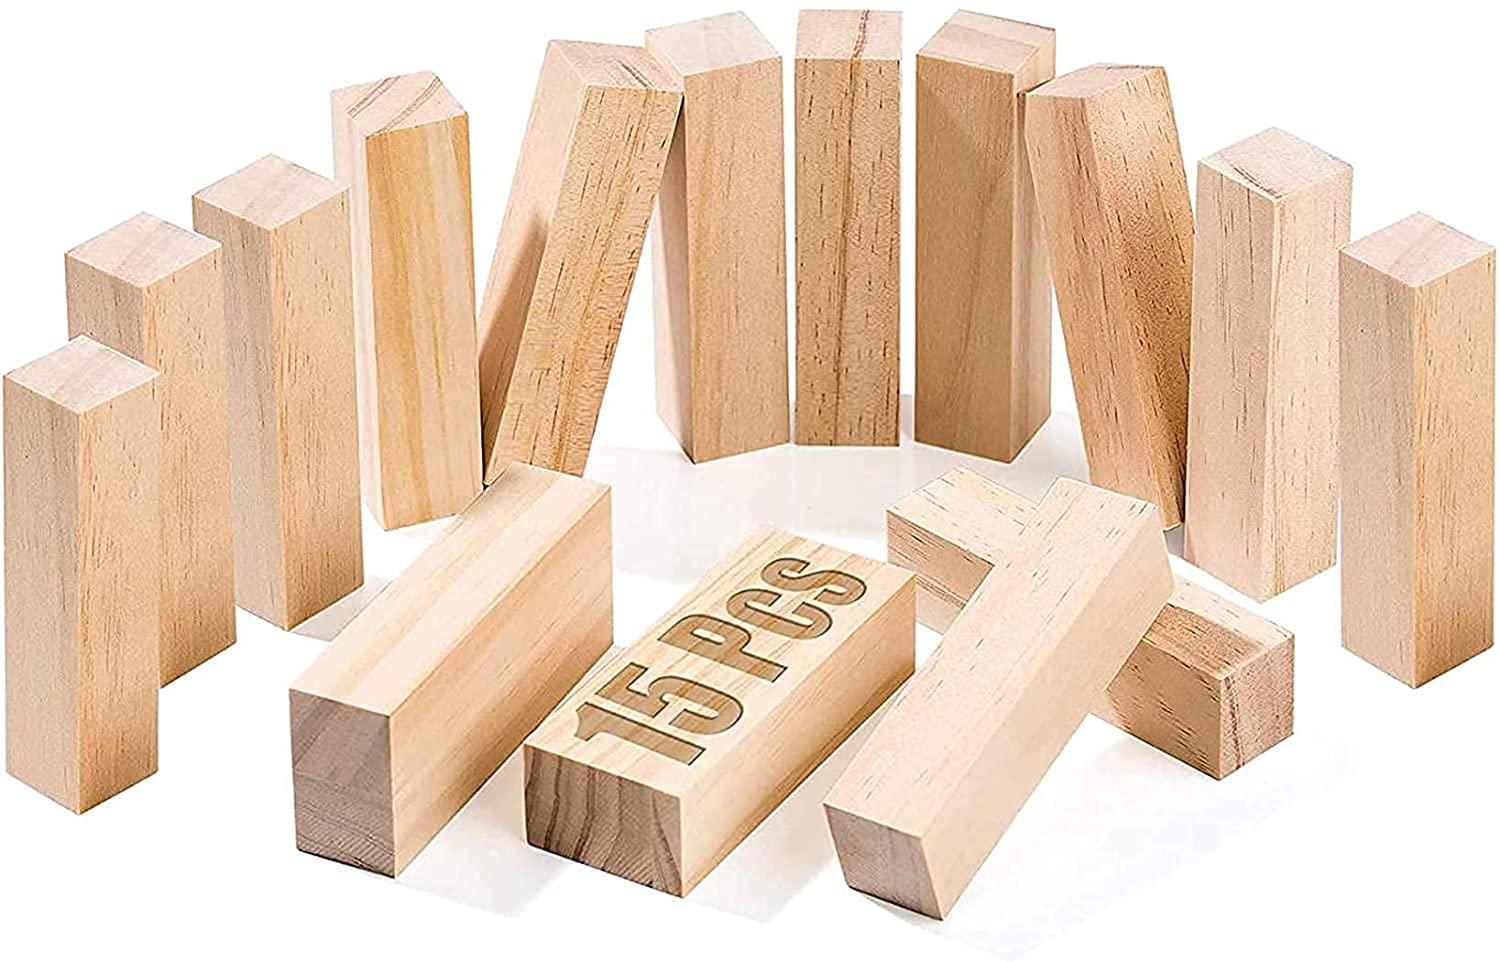 YOUEON 12 Pcs Wood Blocks for Carving, 4x2x2 Inch Carving Blocks, Whittling  Wood Blocks for Beginners and Experts, Unfinished Wooden Blocks for Arts